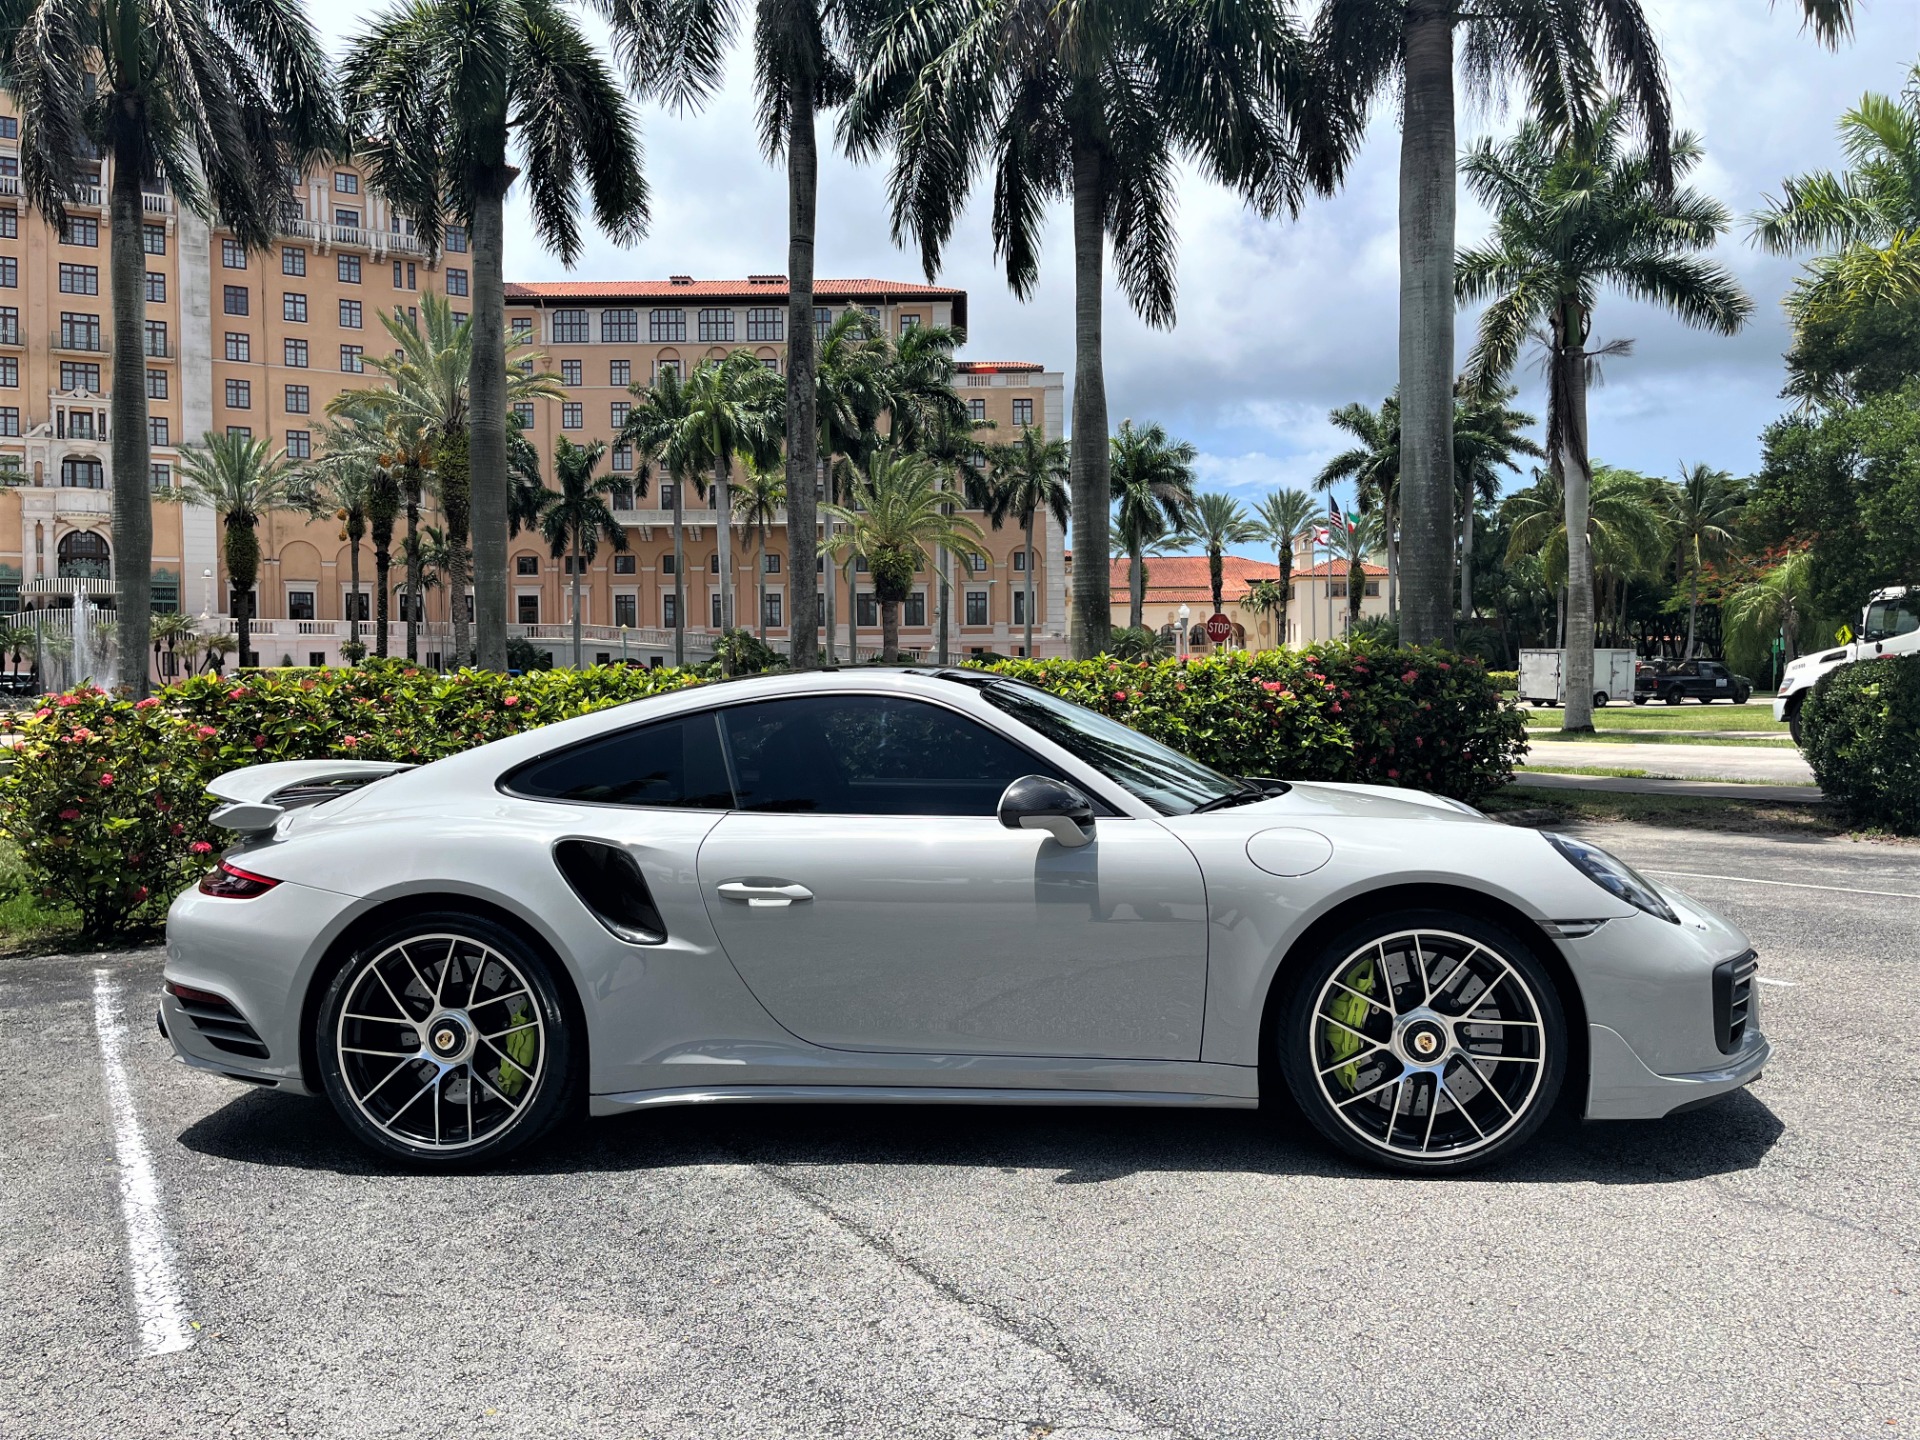 Used 2018 Porsche 911 Turbo S for sale $166,850 at The Gables Sports Cars in Miami FL 33146 3